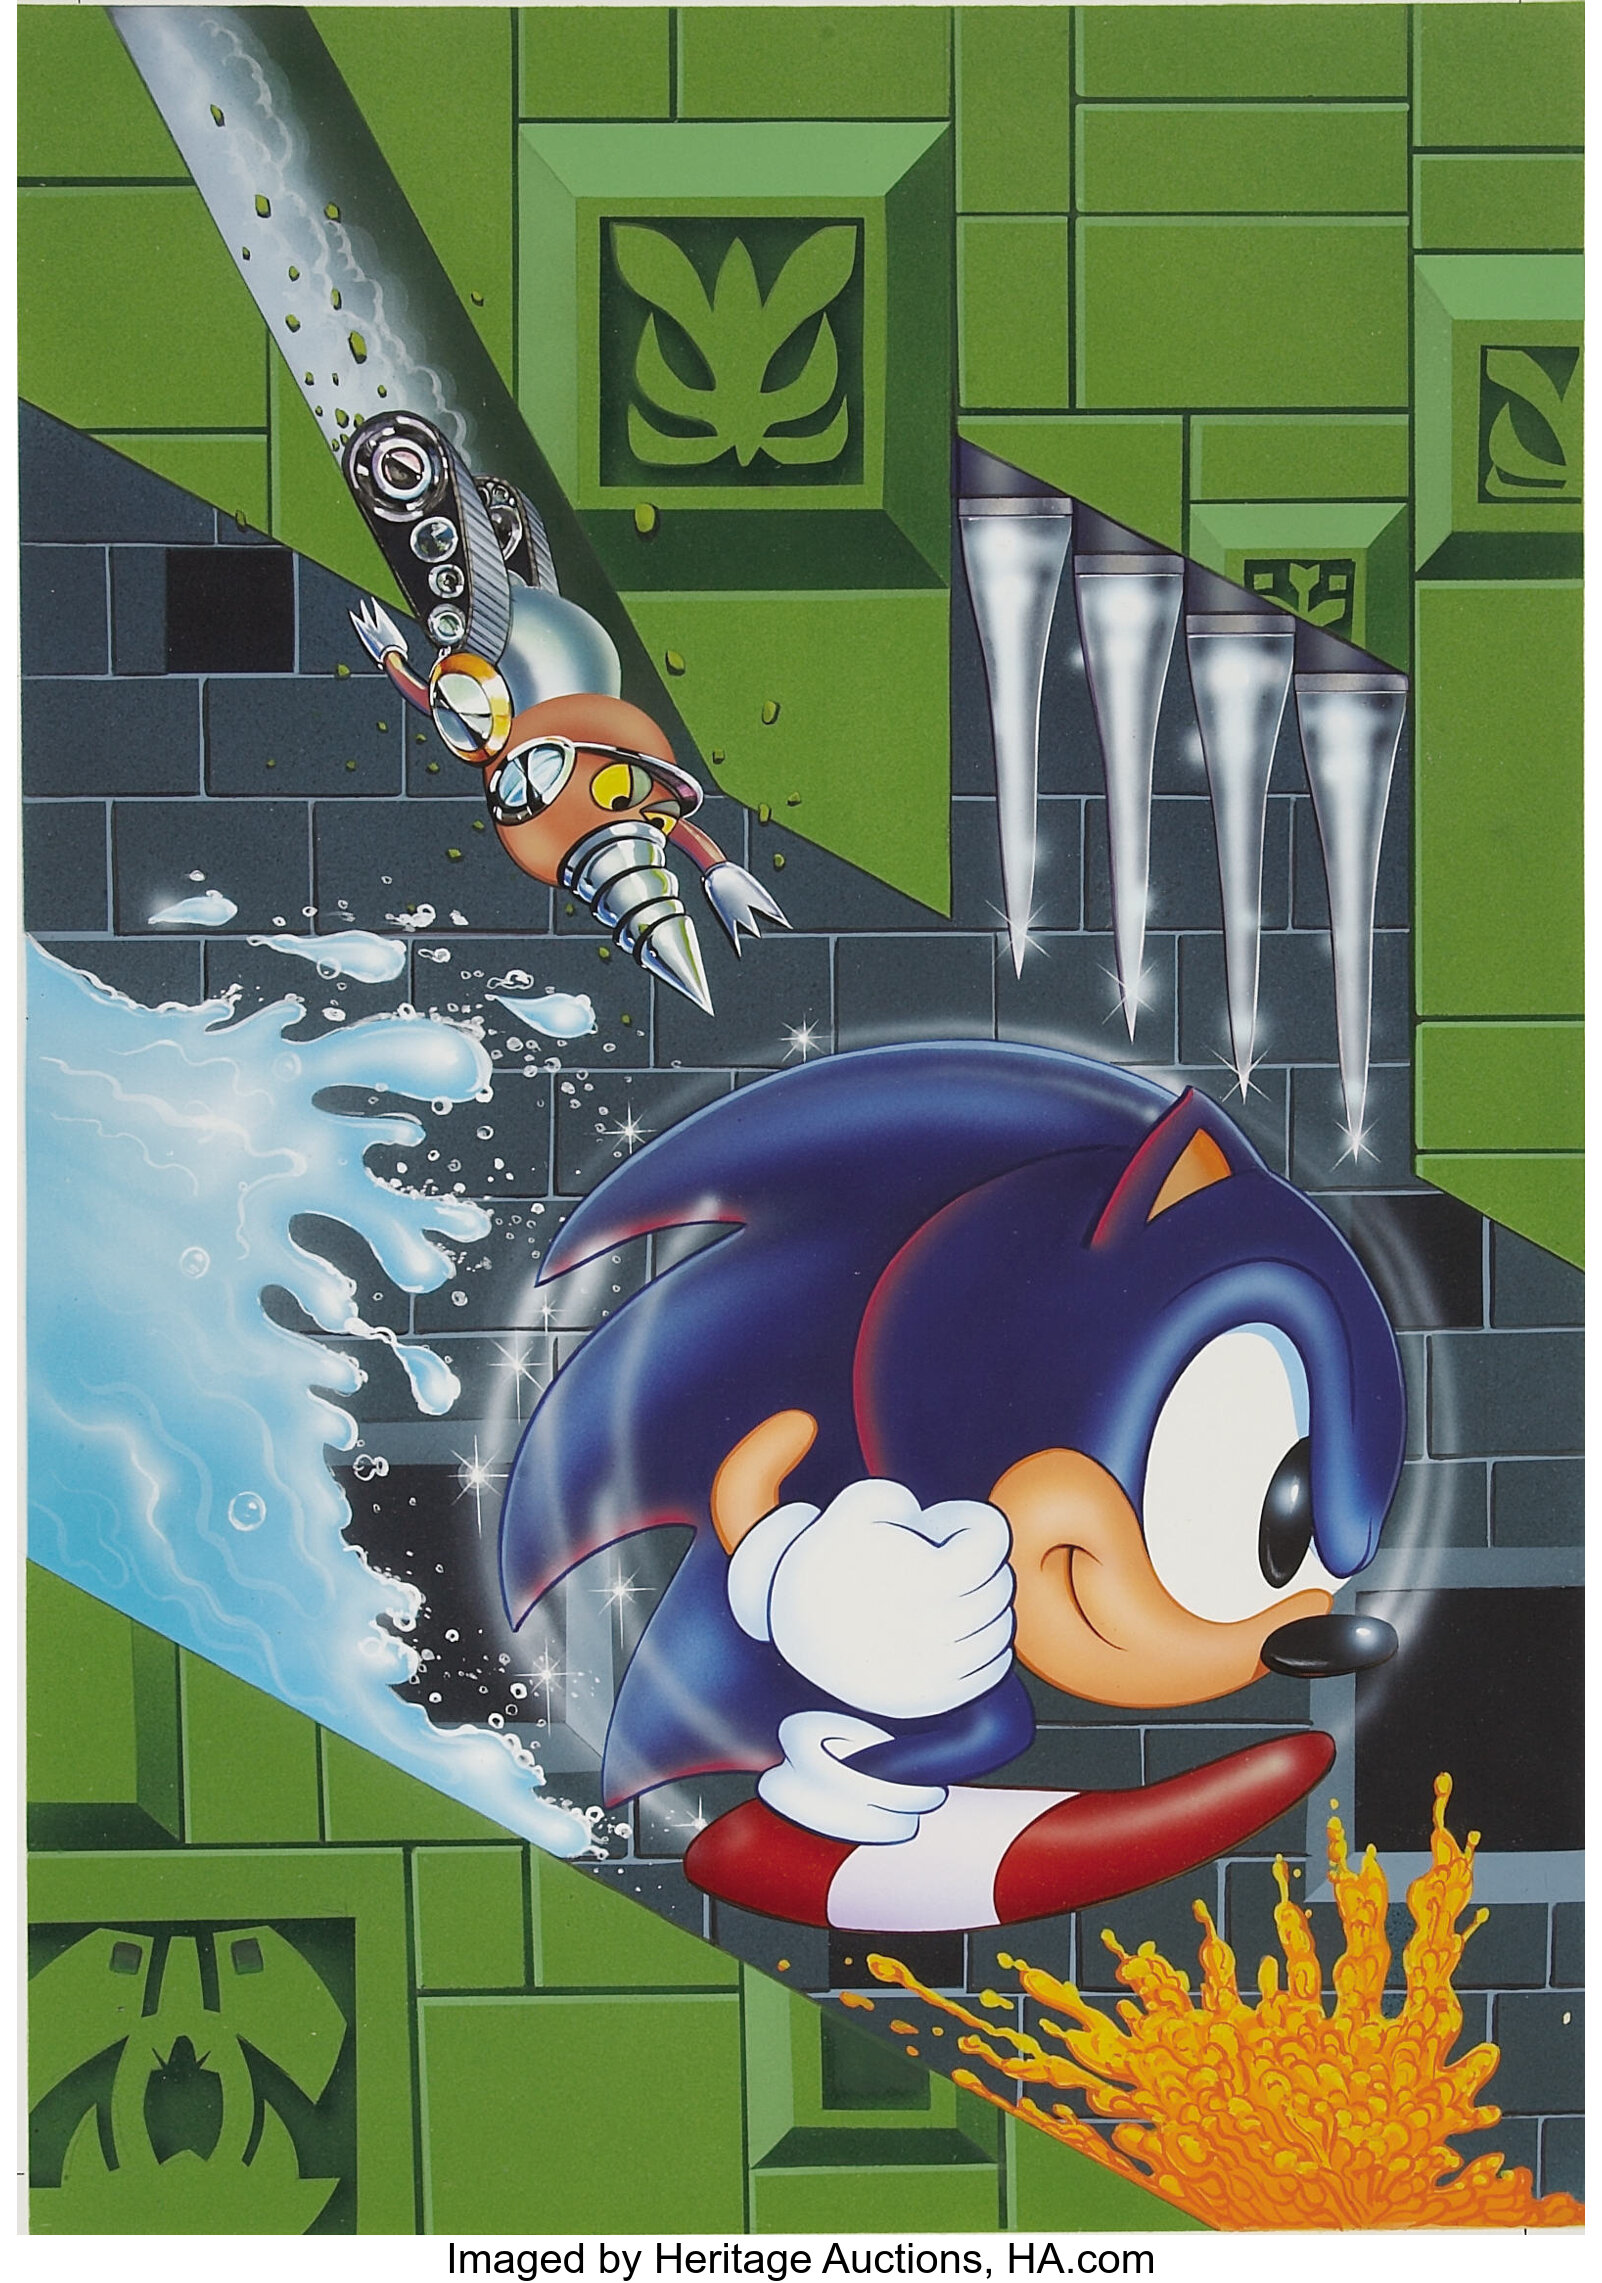 Sonic the Hedgehog - Sonic 1 - American Poster Art by